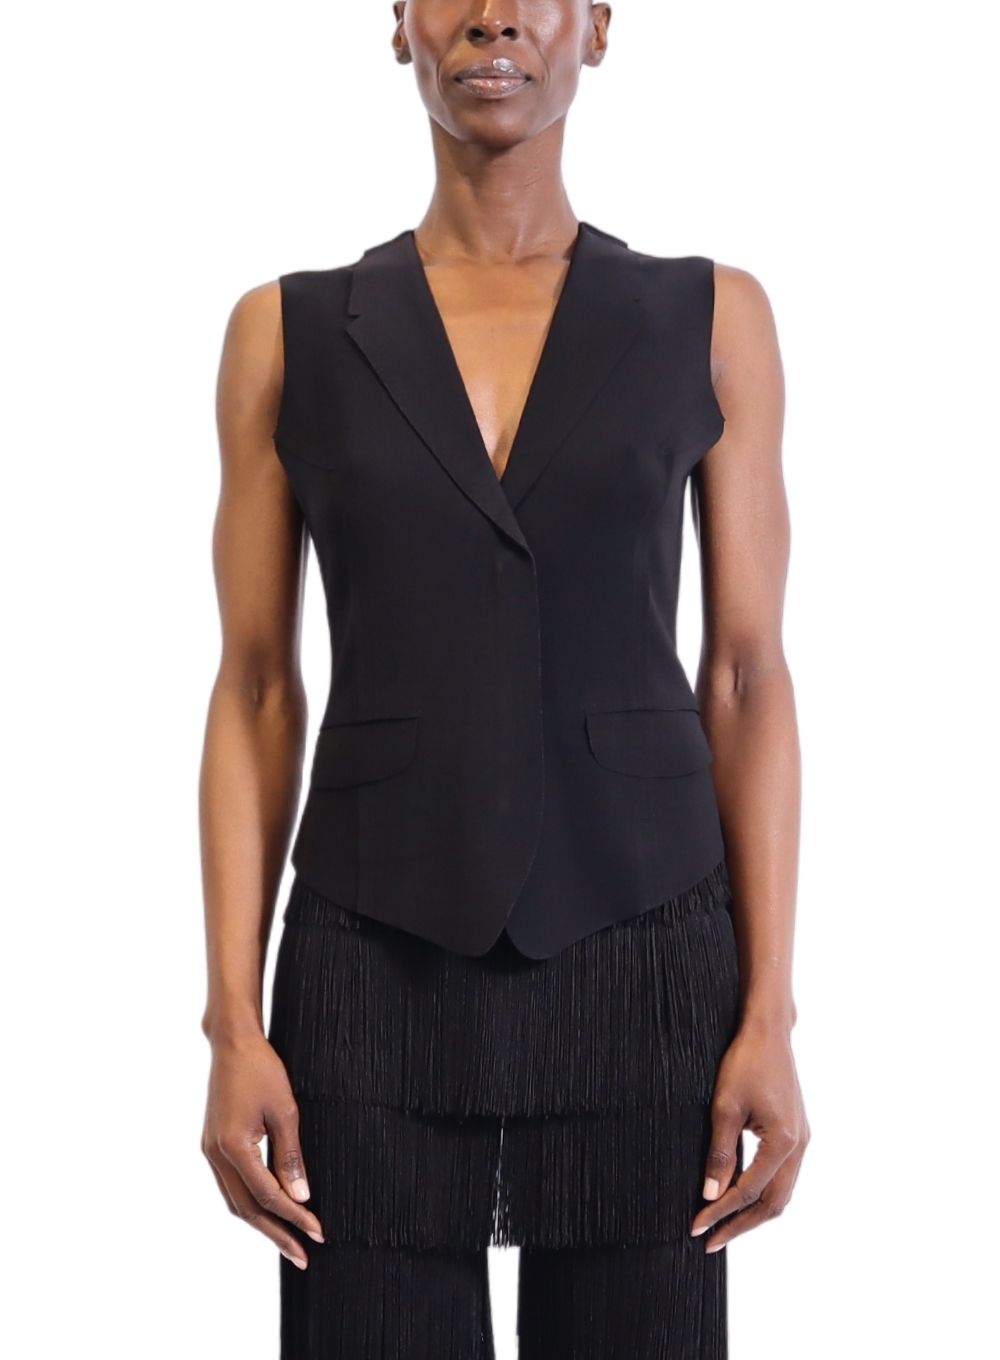 NORMA KAMALI | Vest With Lapel